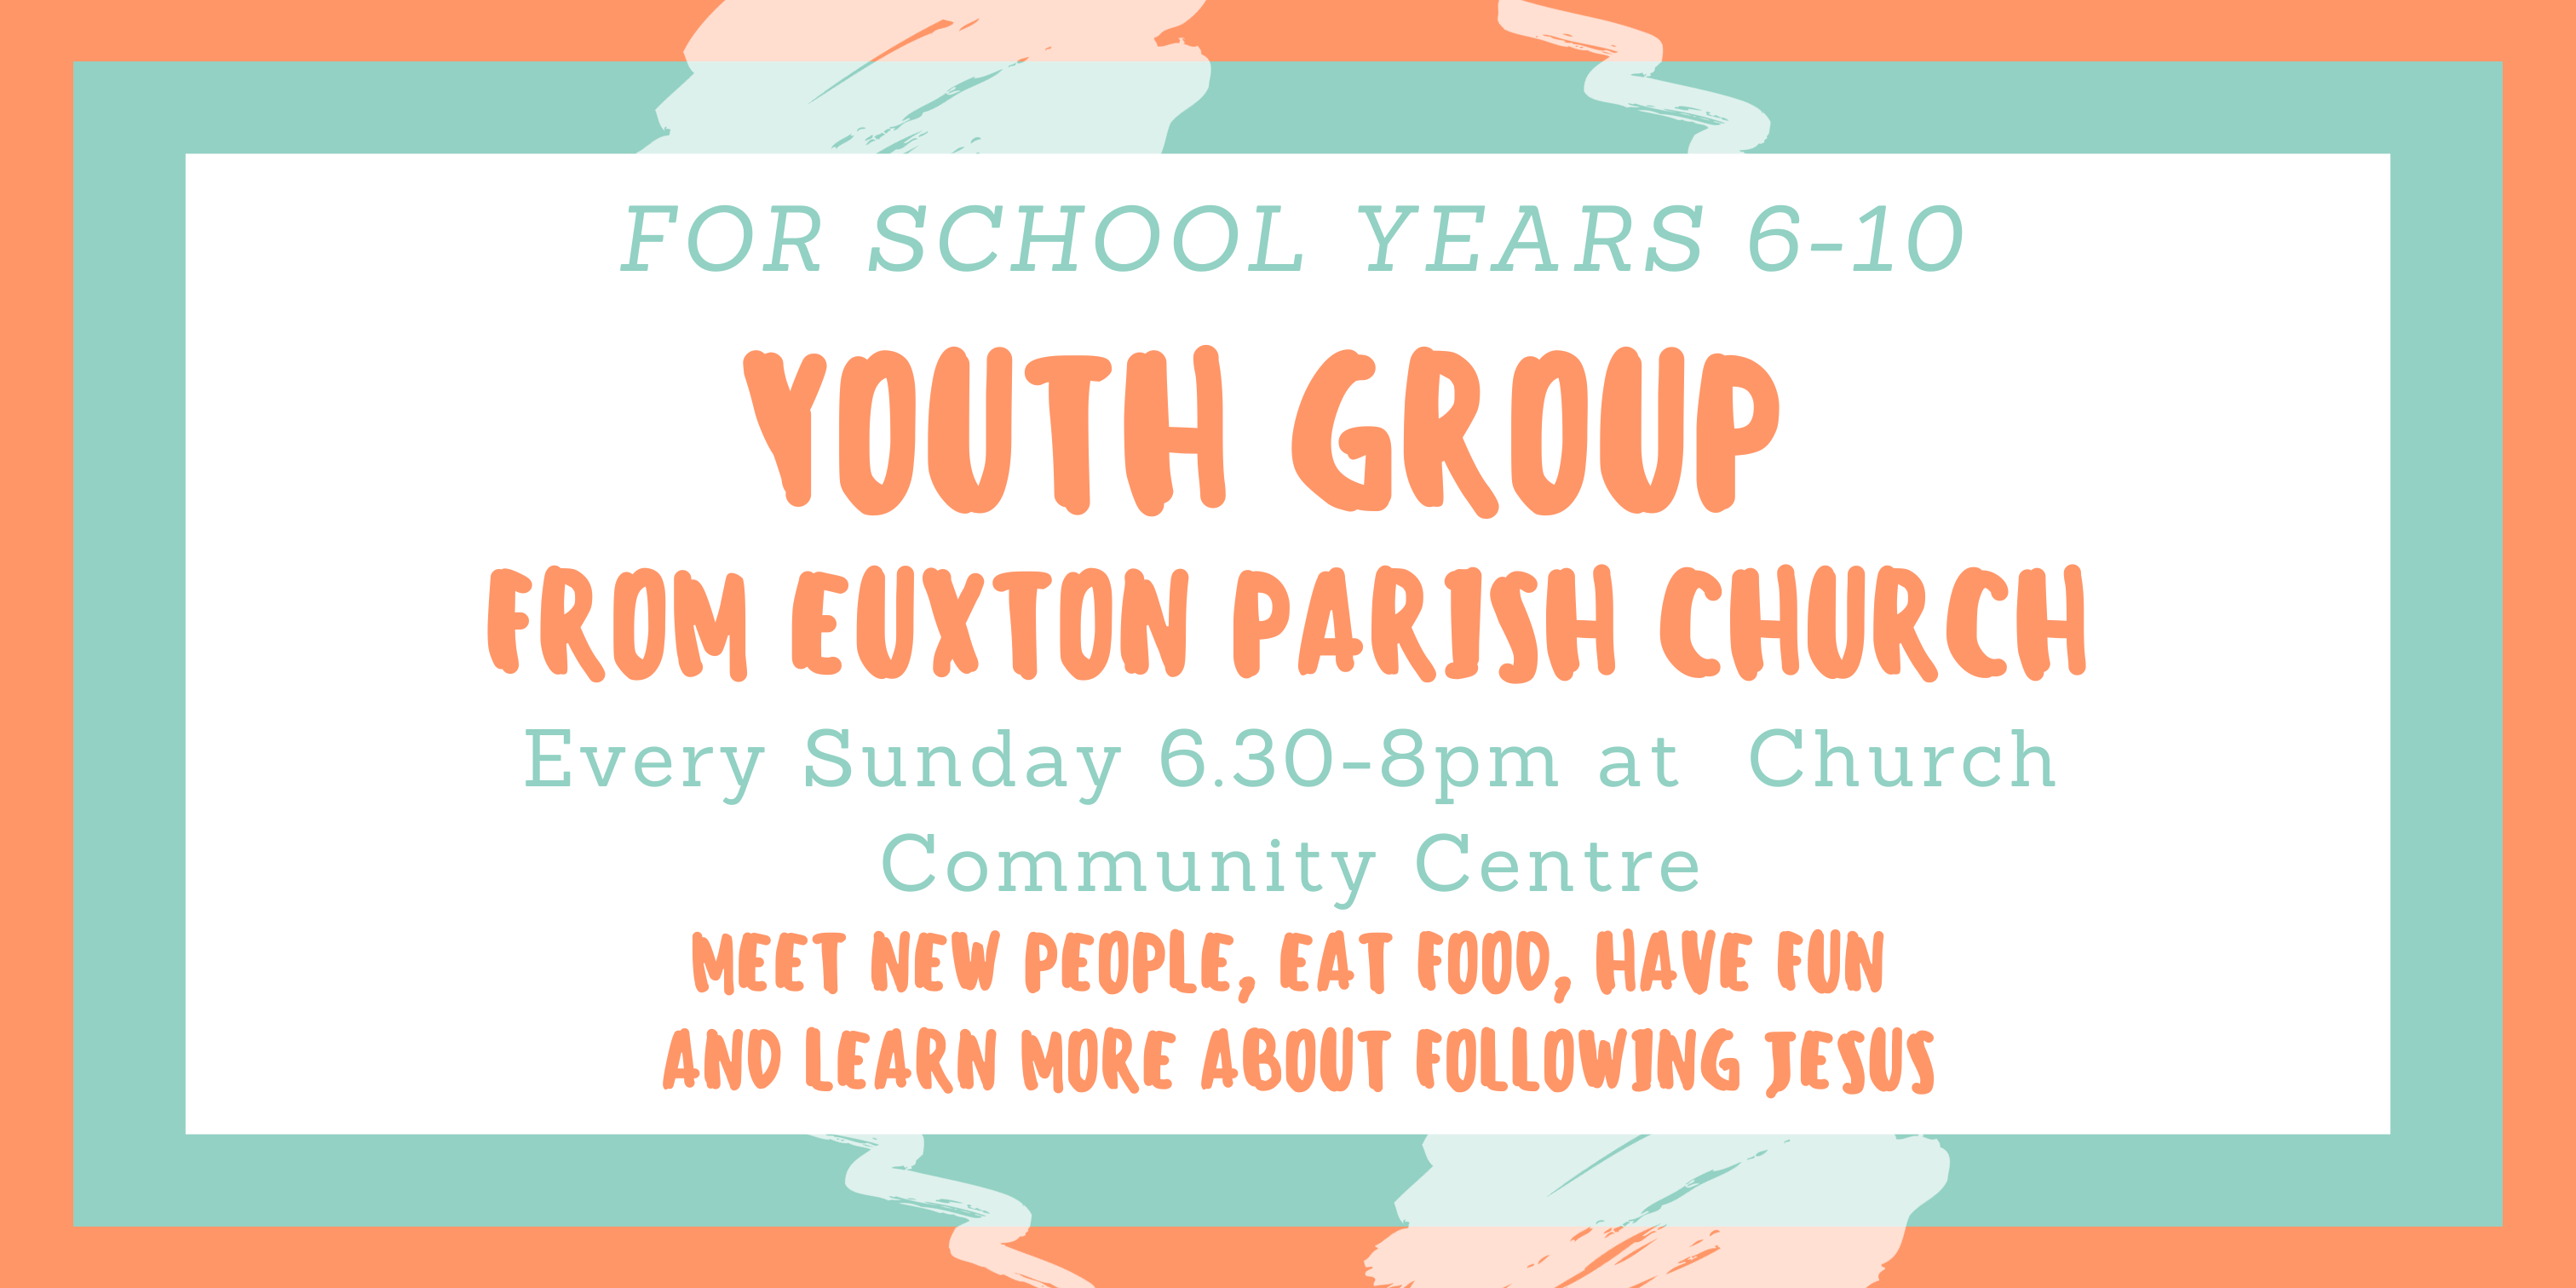 Youth Groups time and place (in text below)